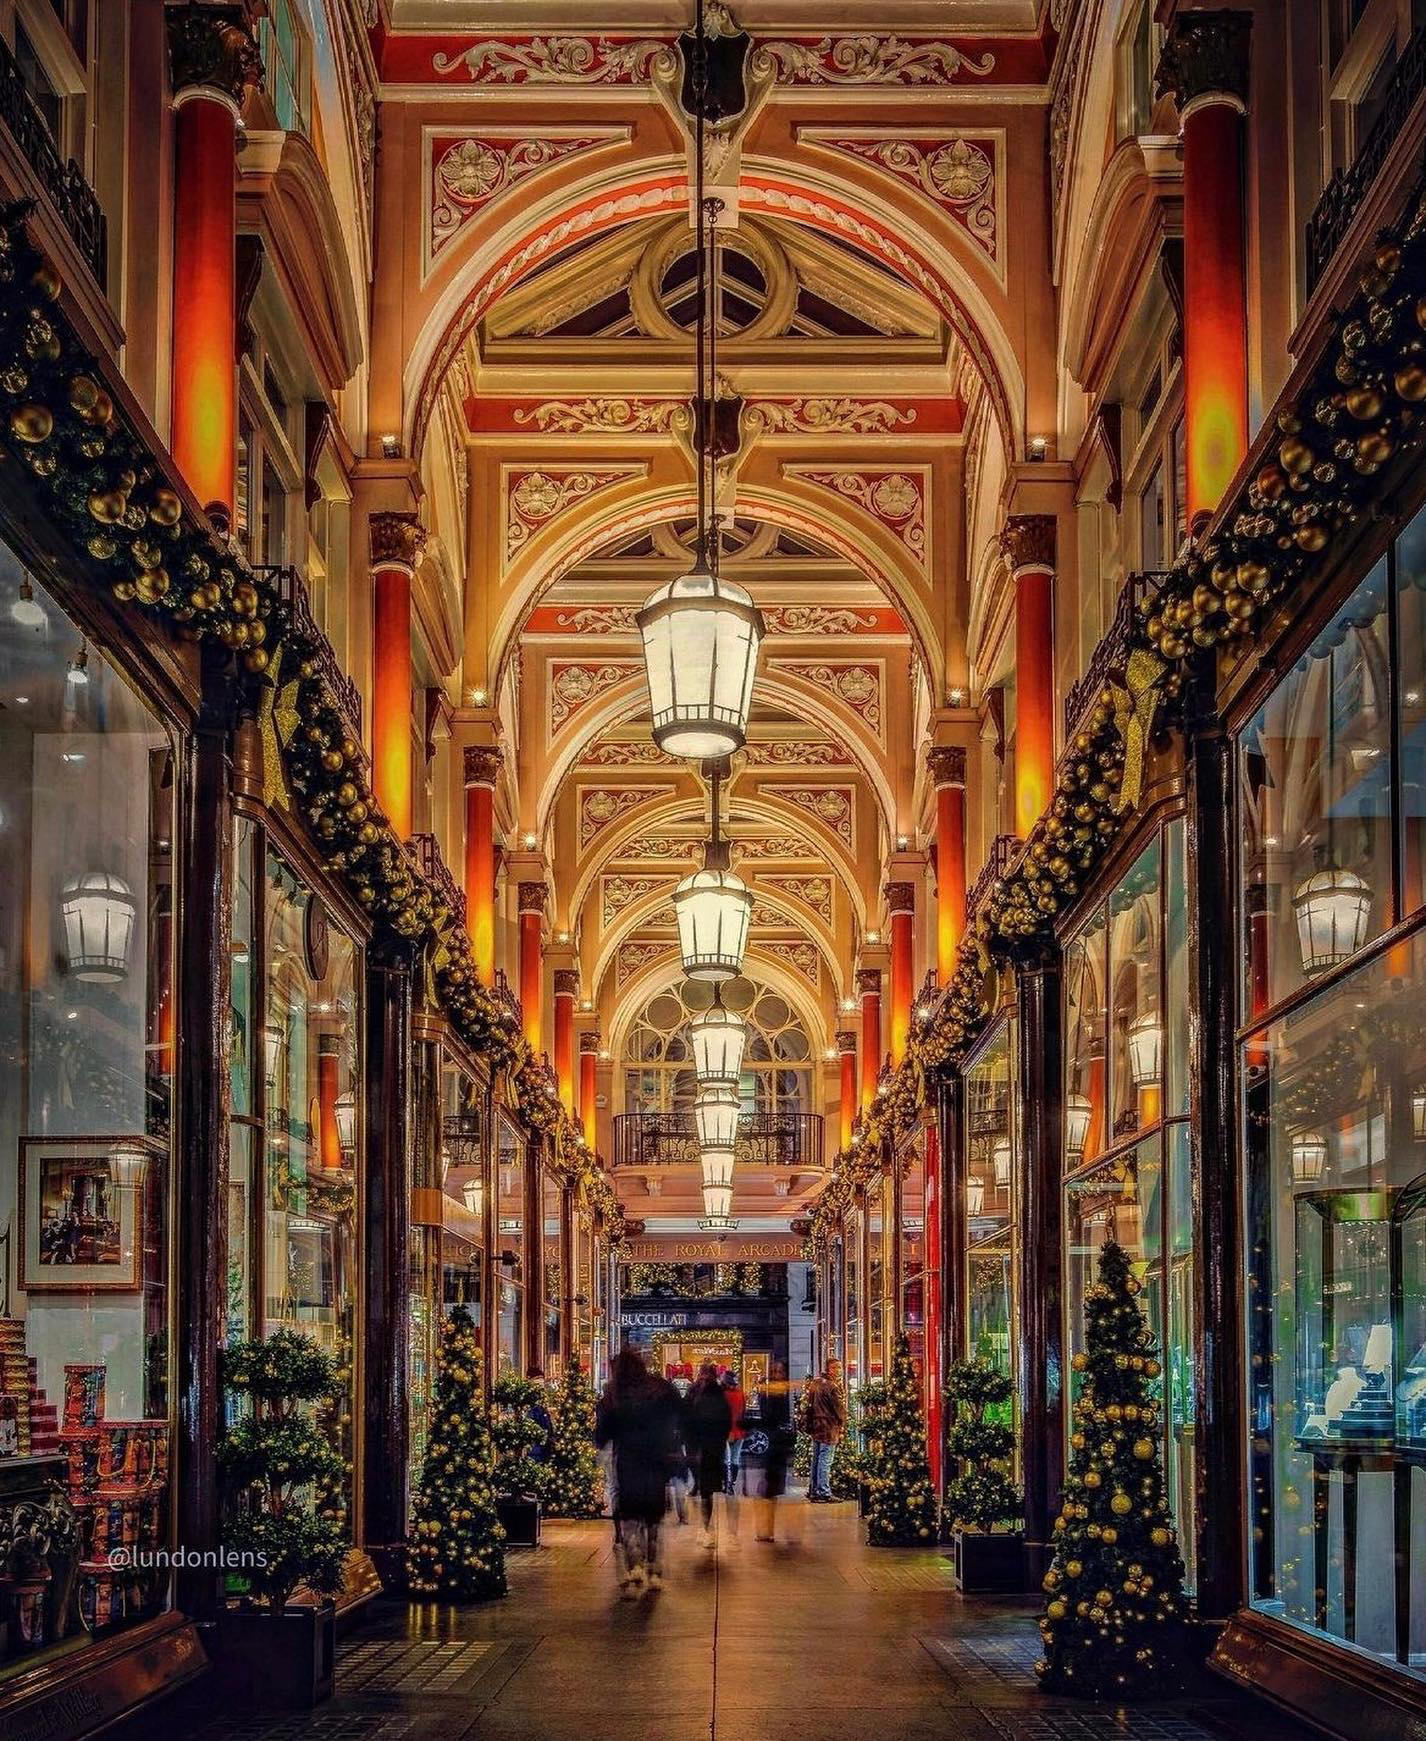 All Things England - It's beginning to look a lot like Christmas, especially in The Royal Arcade